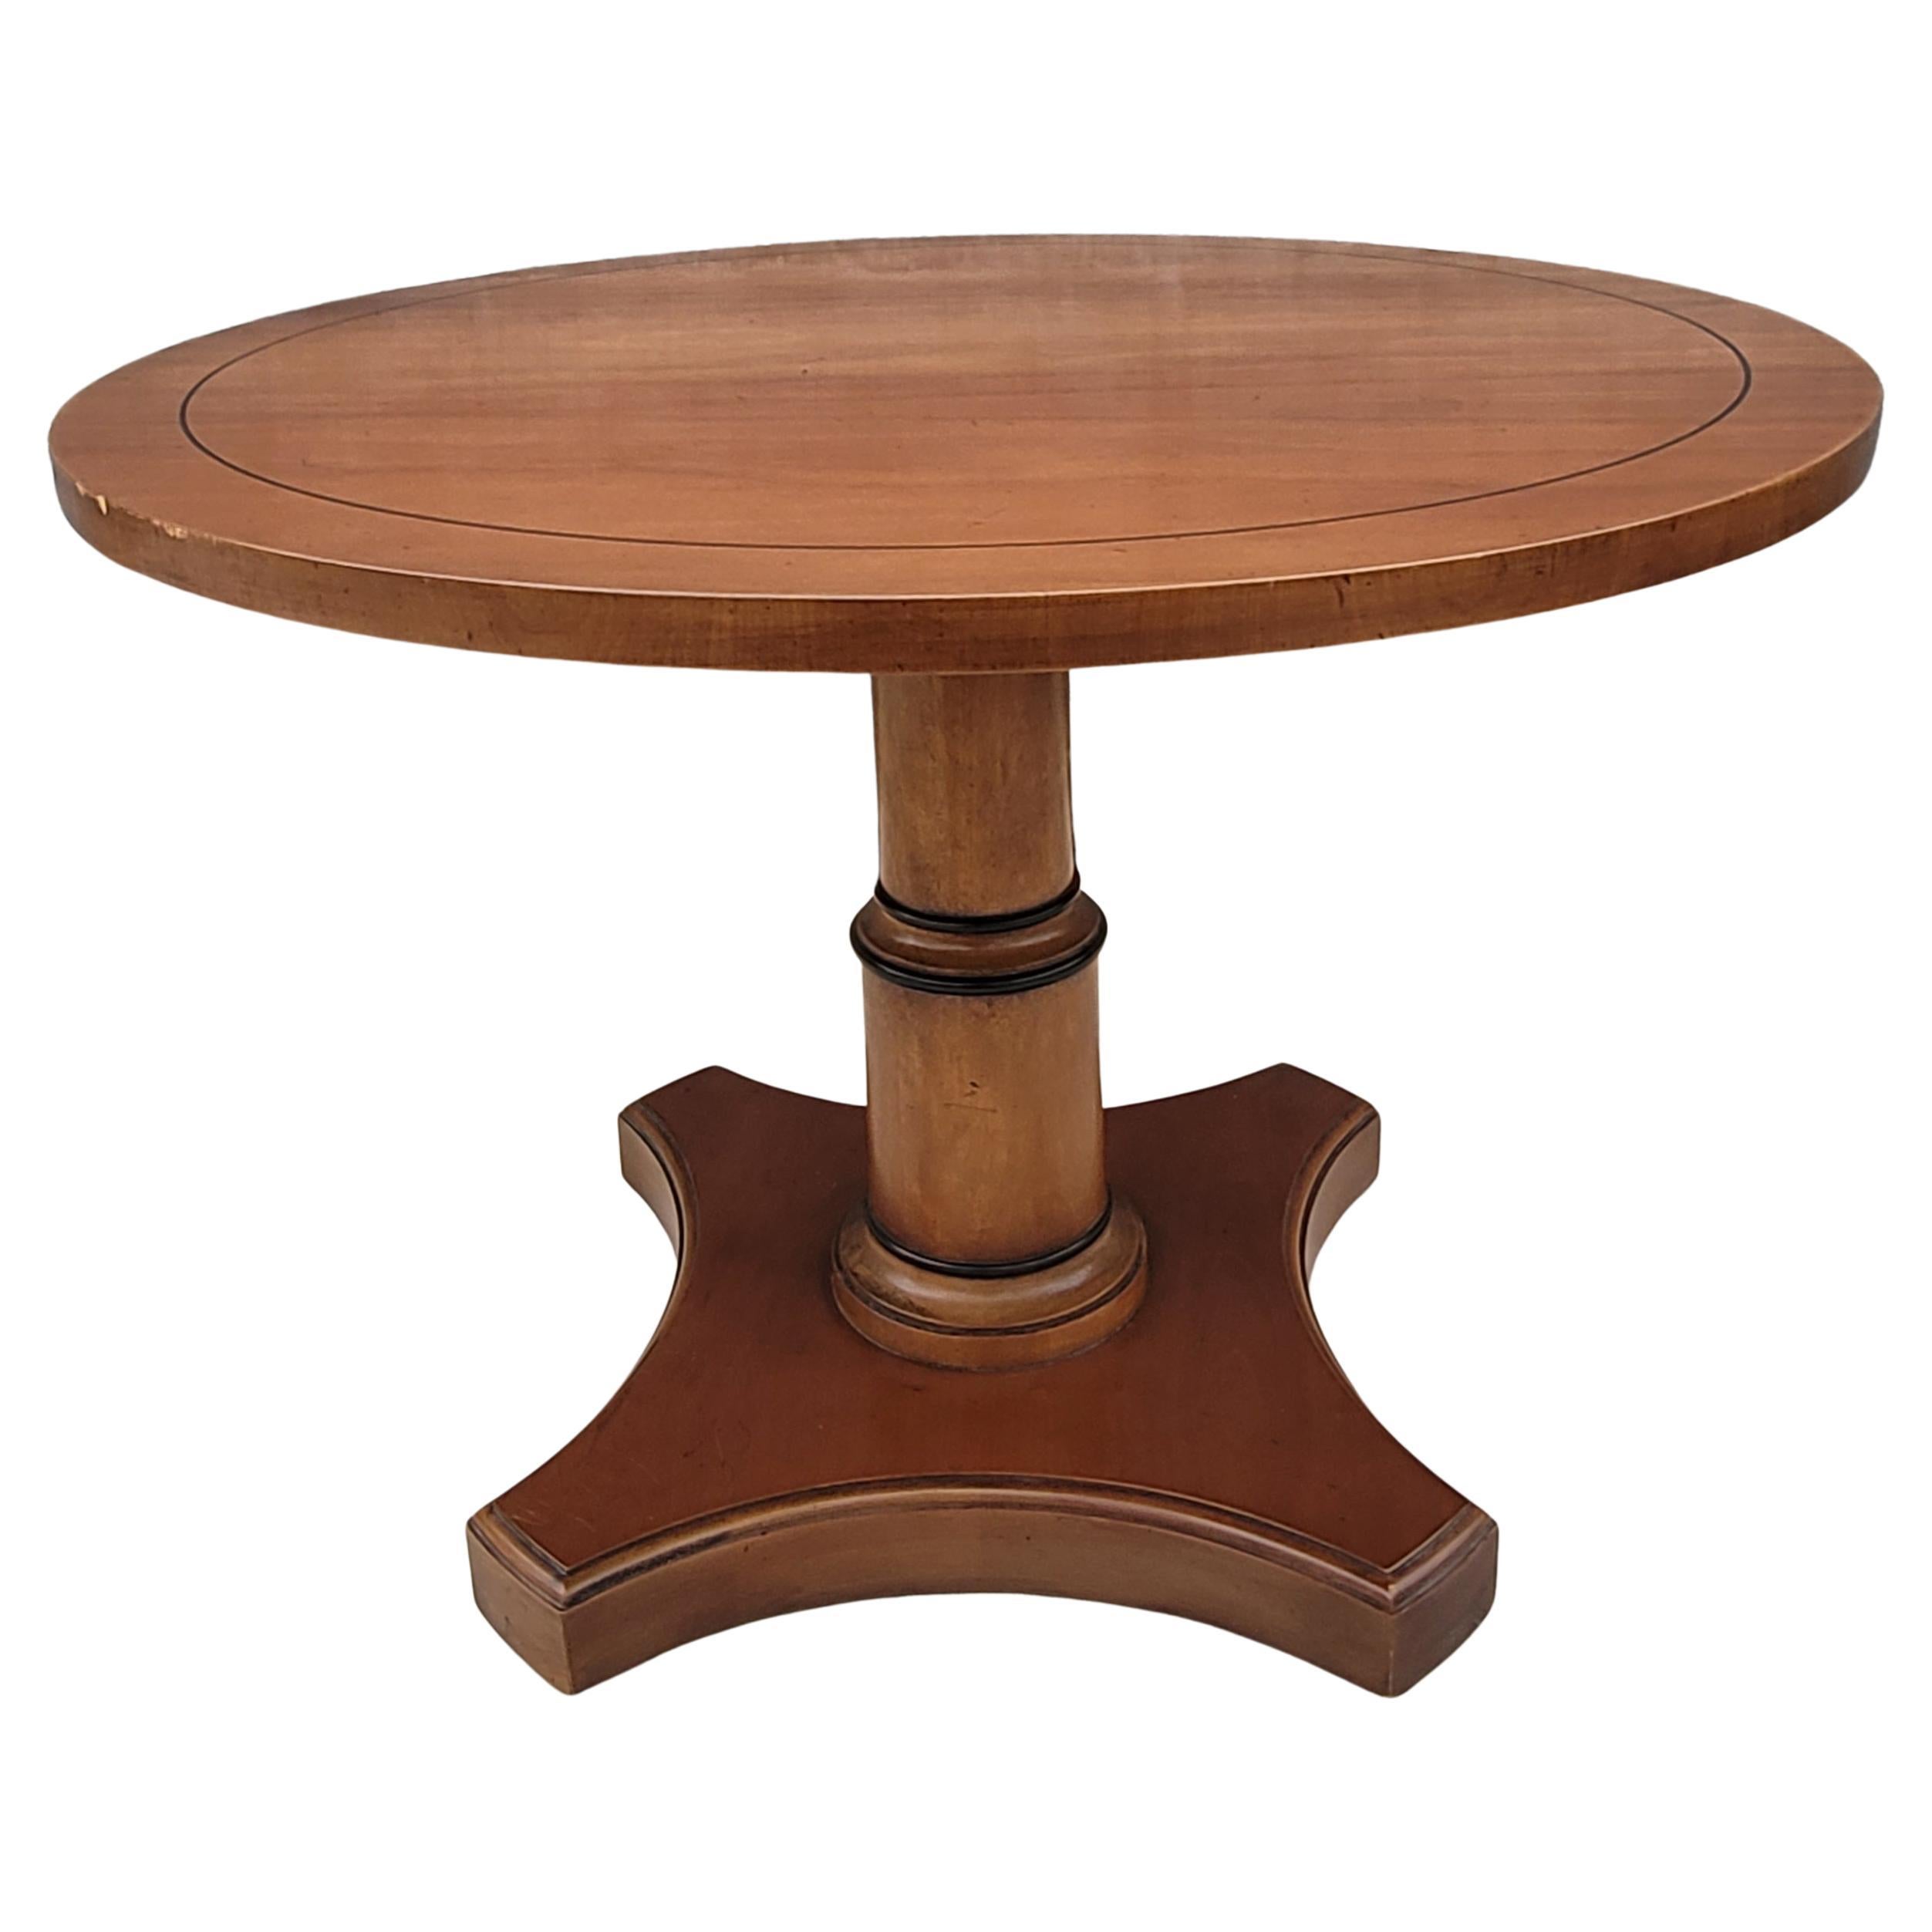 Veneer Swedish Modern Art Deco Style Fruitwood Round Pedestal End or Side Table For Sale